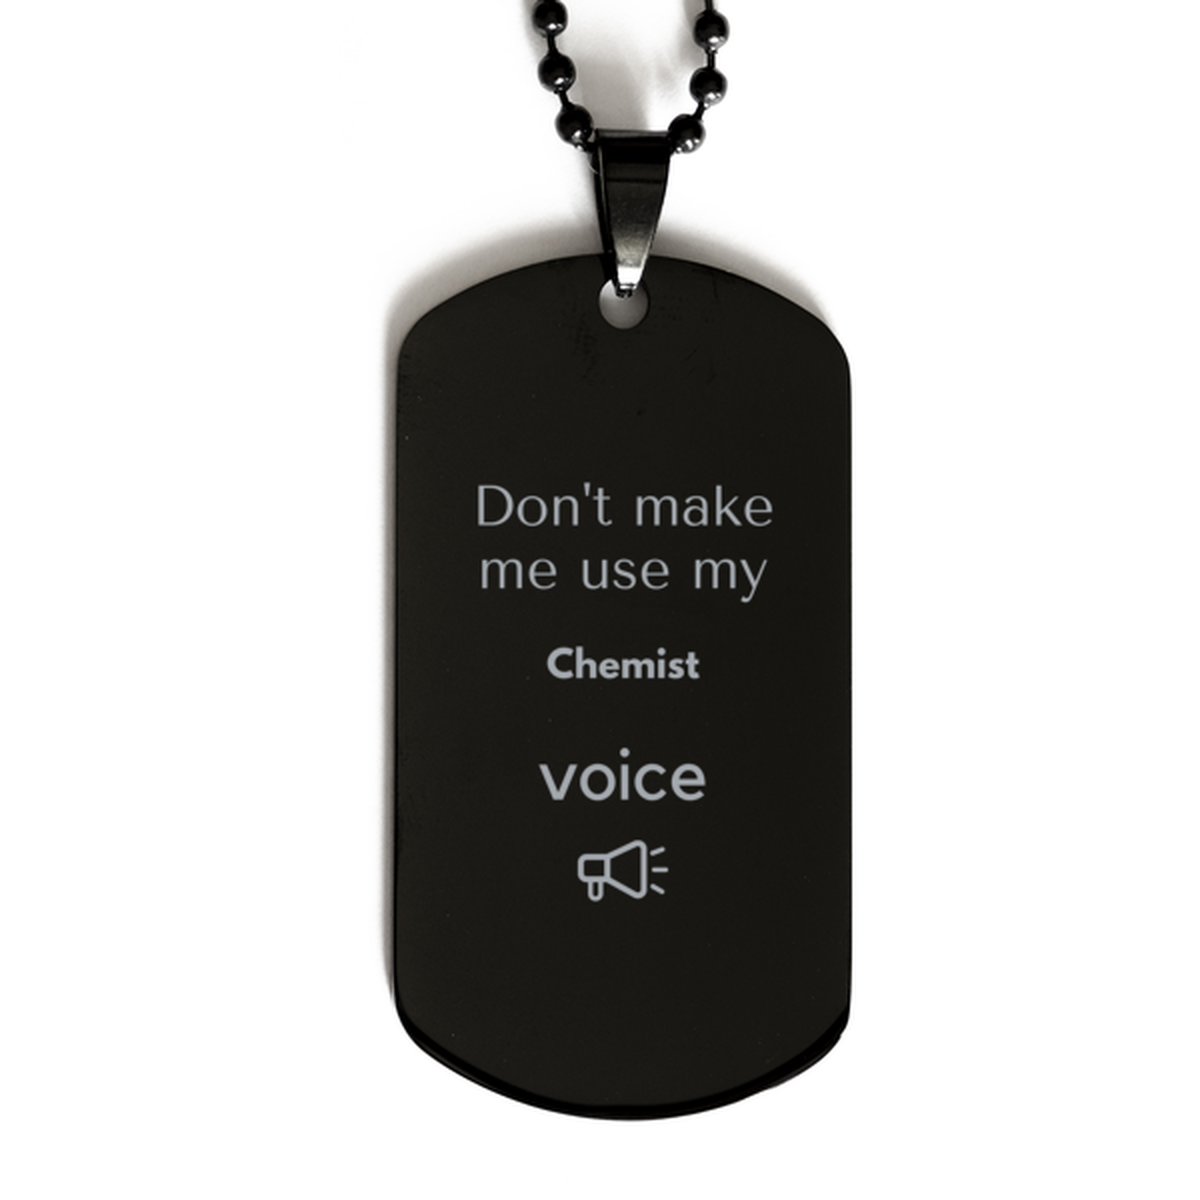 Don't make me use my Chemist voice, Sarcasm Chemist Gifts, Christmas Chemist Black Dog Tag Birthday Unique Gifts For Chemist Coworkers, Men, Women, Colleague, Friends